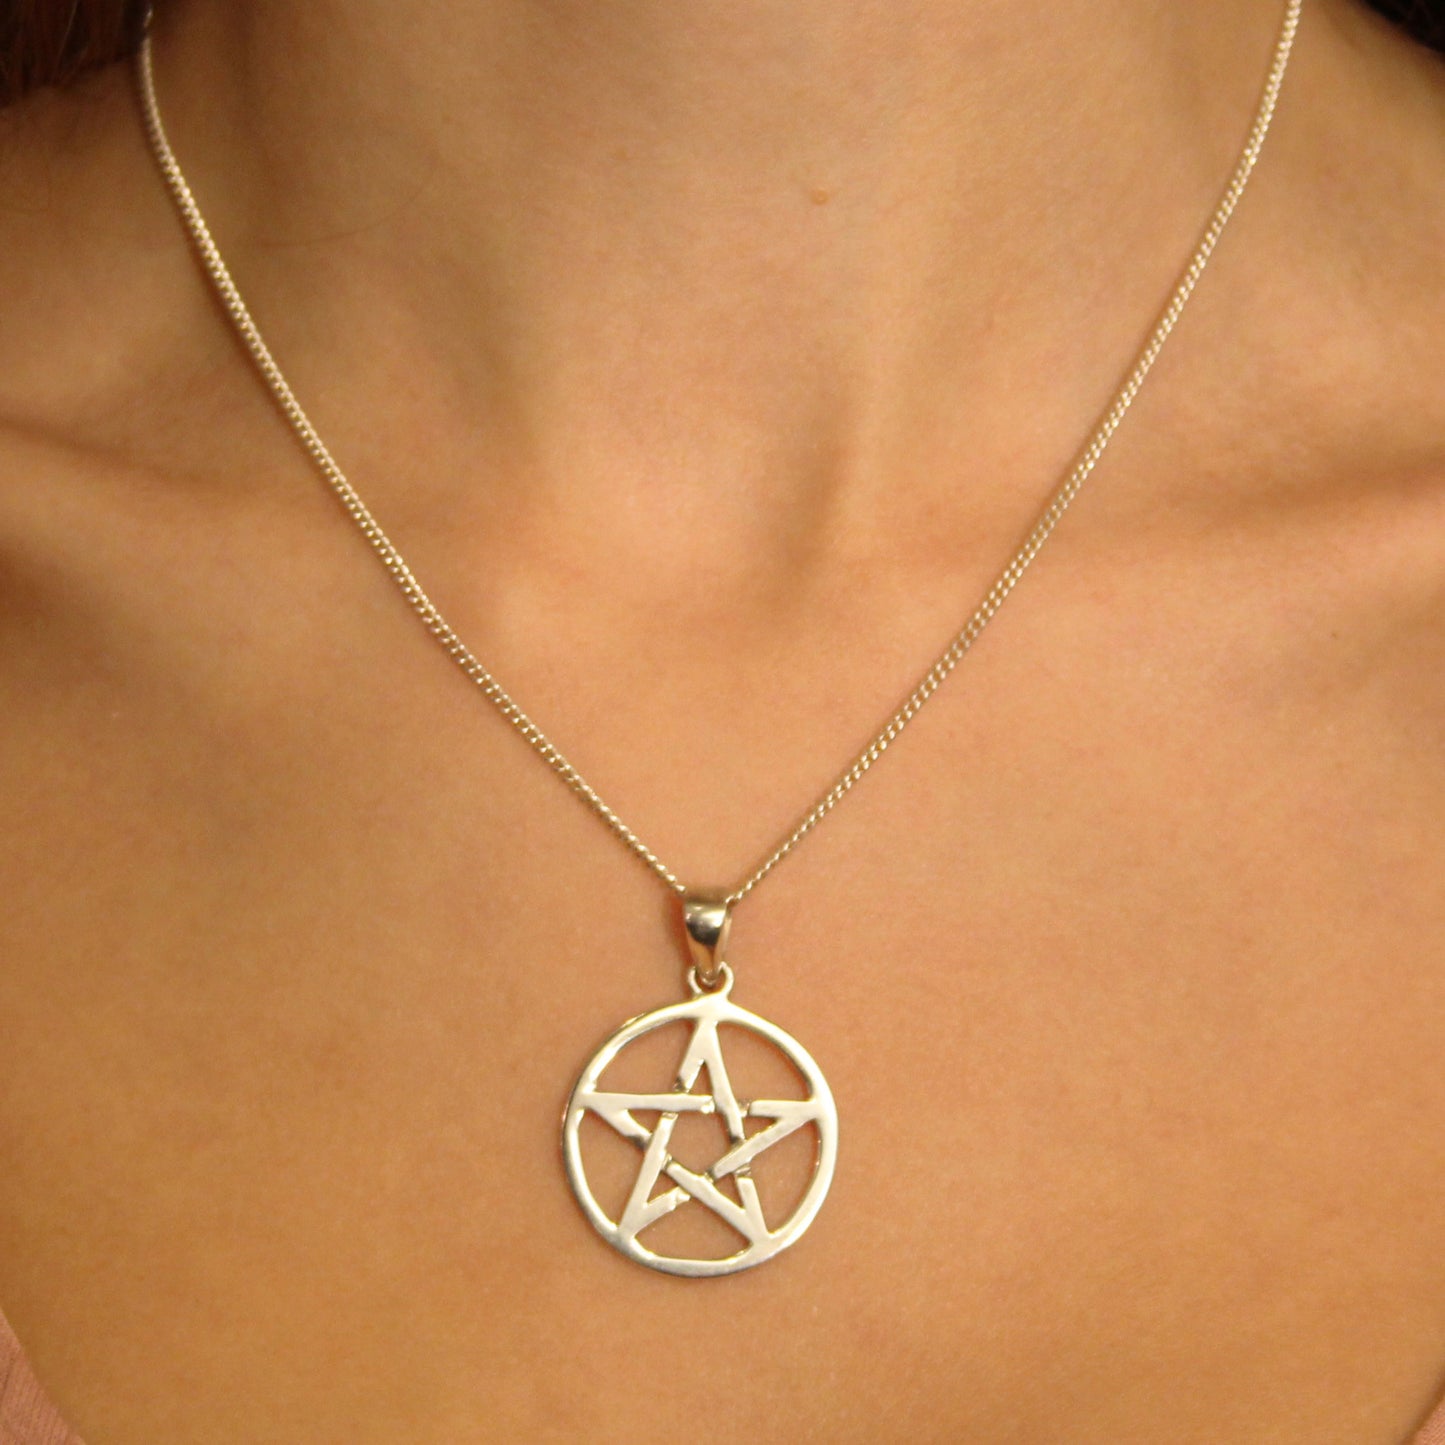 Pewter Pentacle Necklace (PN44)